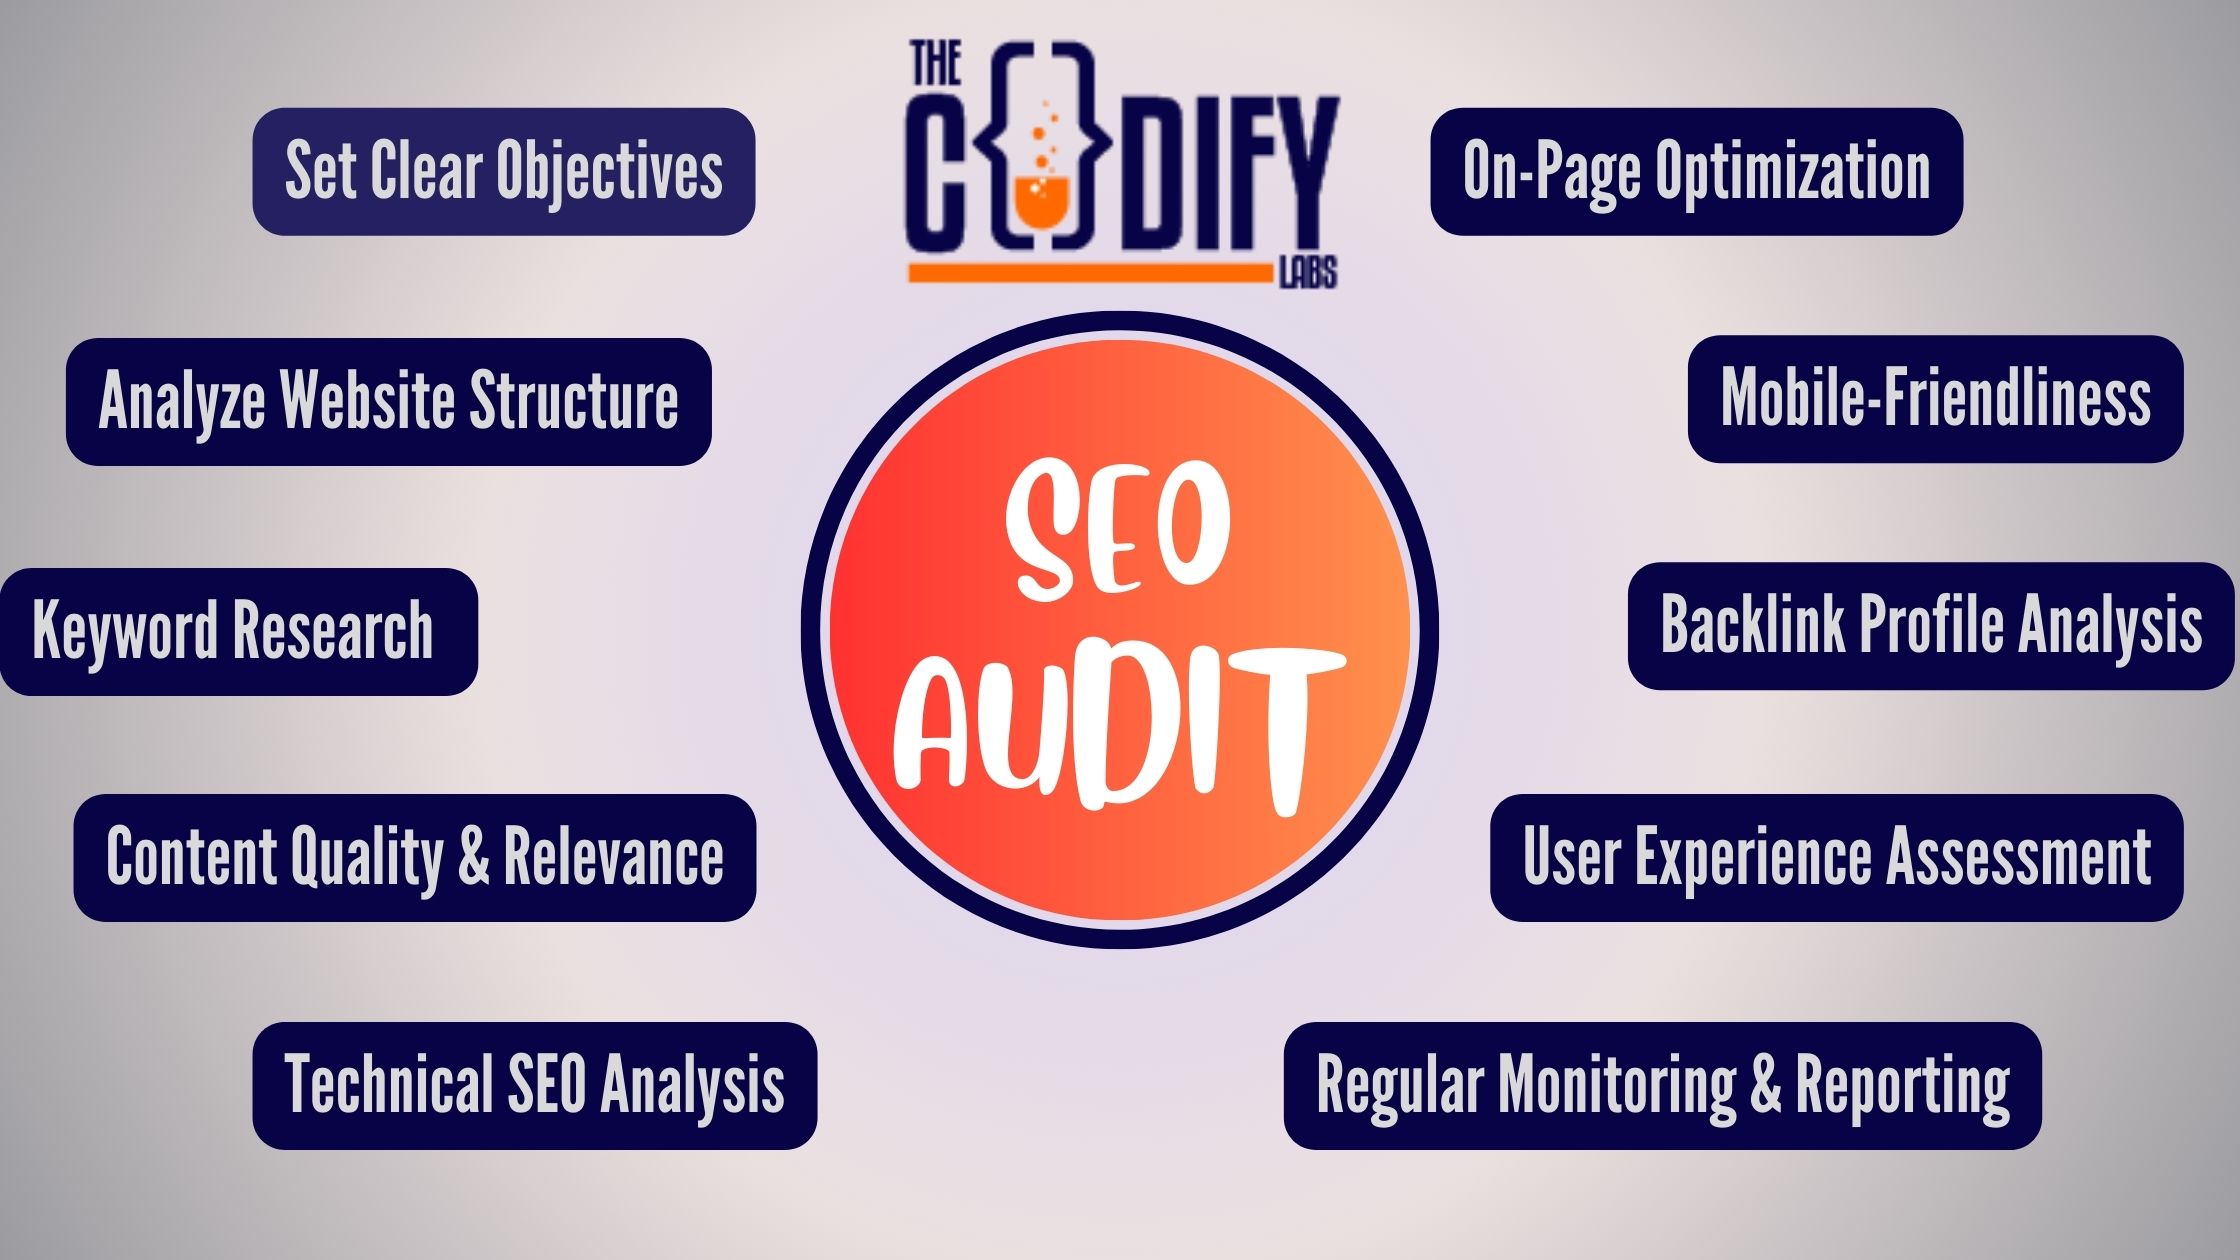 10 Essential Tips for Conducting an Effective SEO Audit